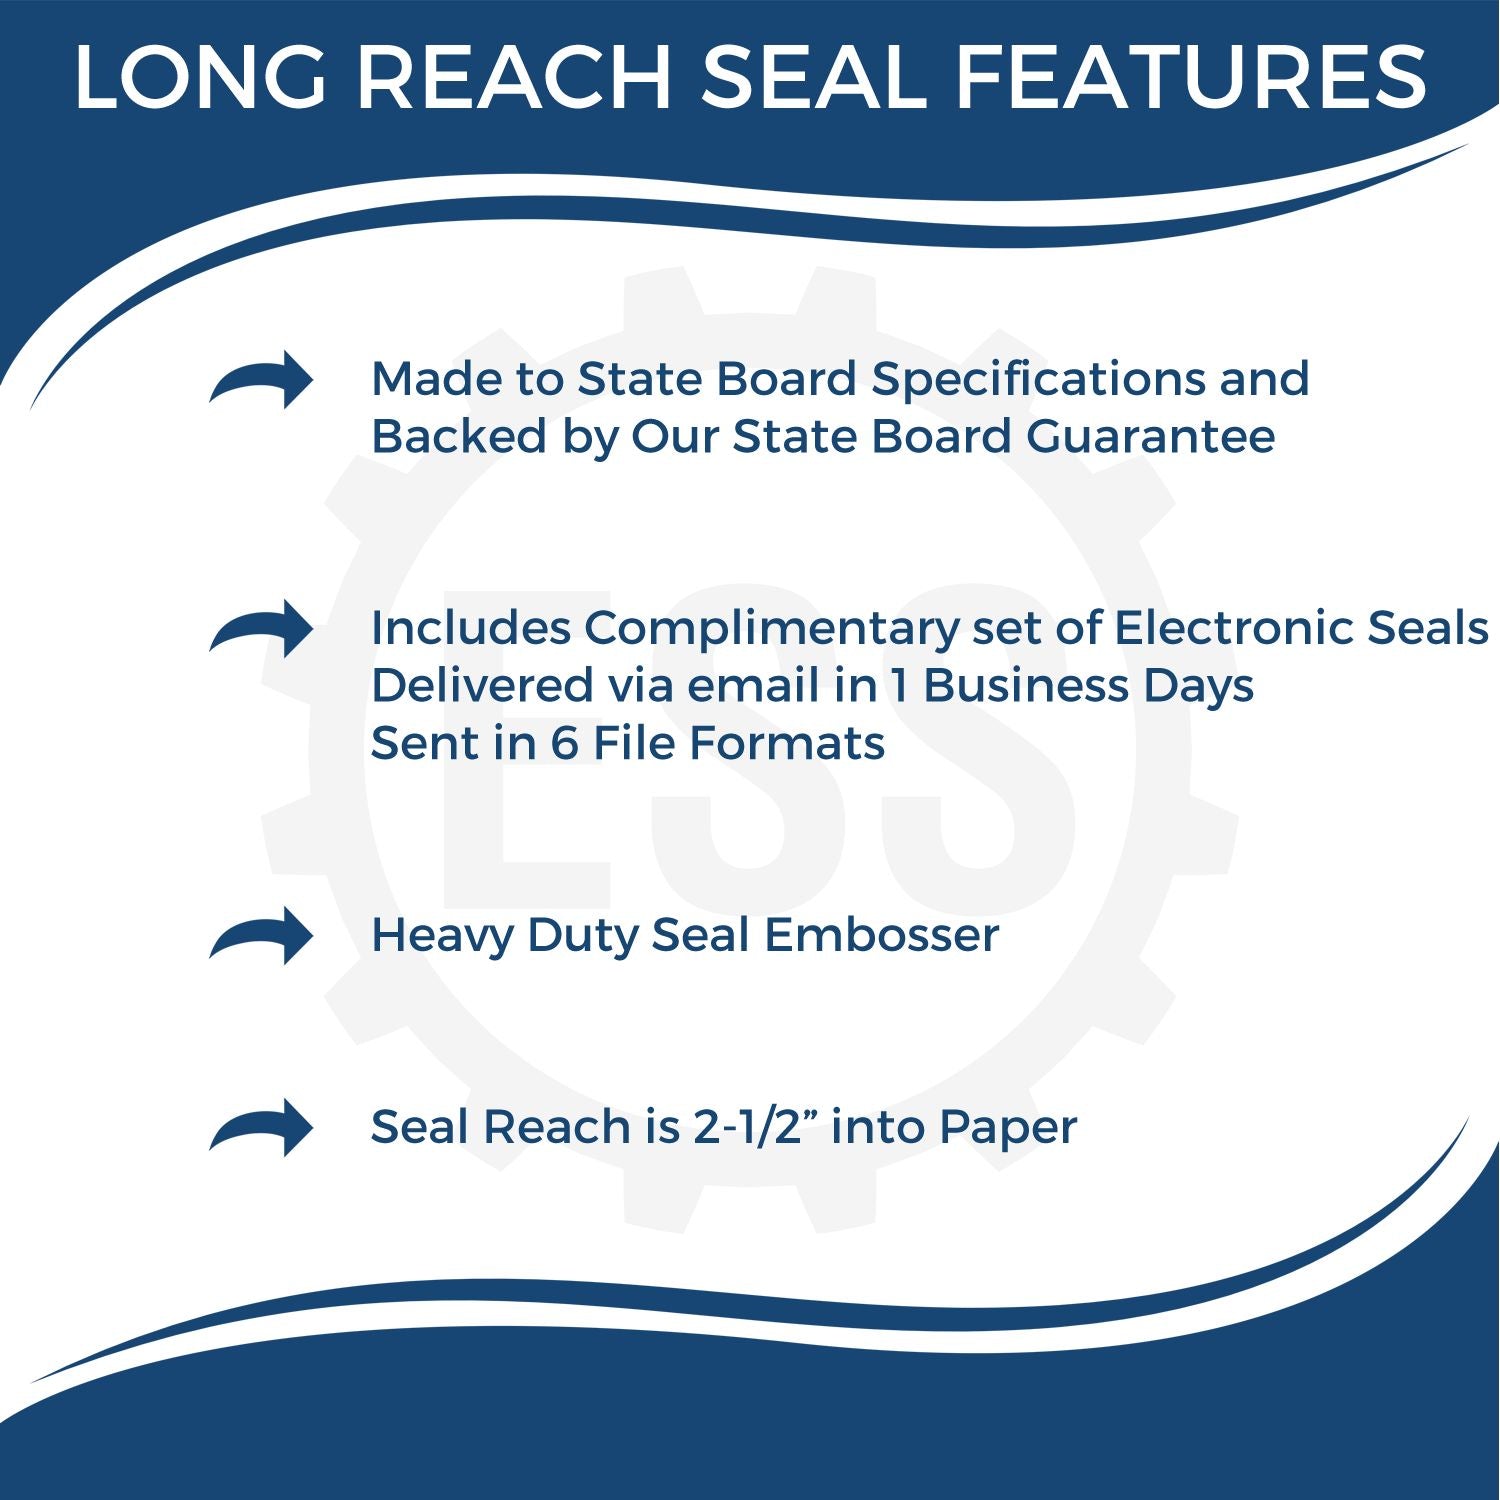 The main image for the Long Reach Virginia PE Seal depicting a sample of the imprint and electronic files